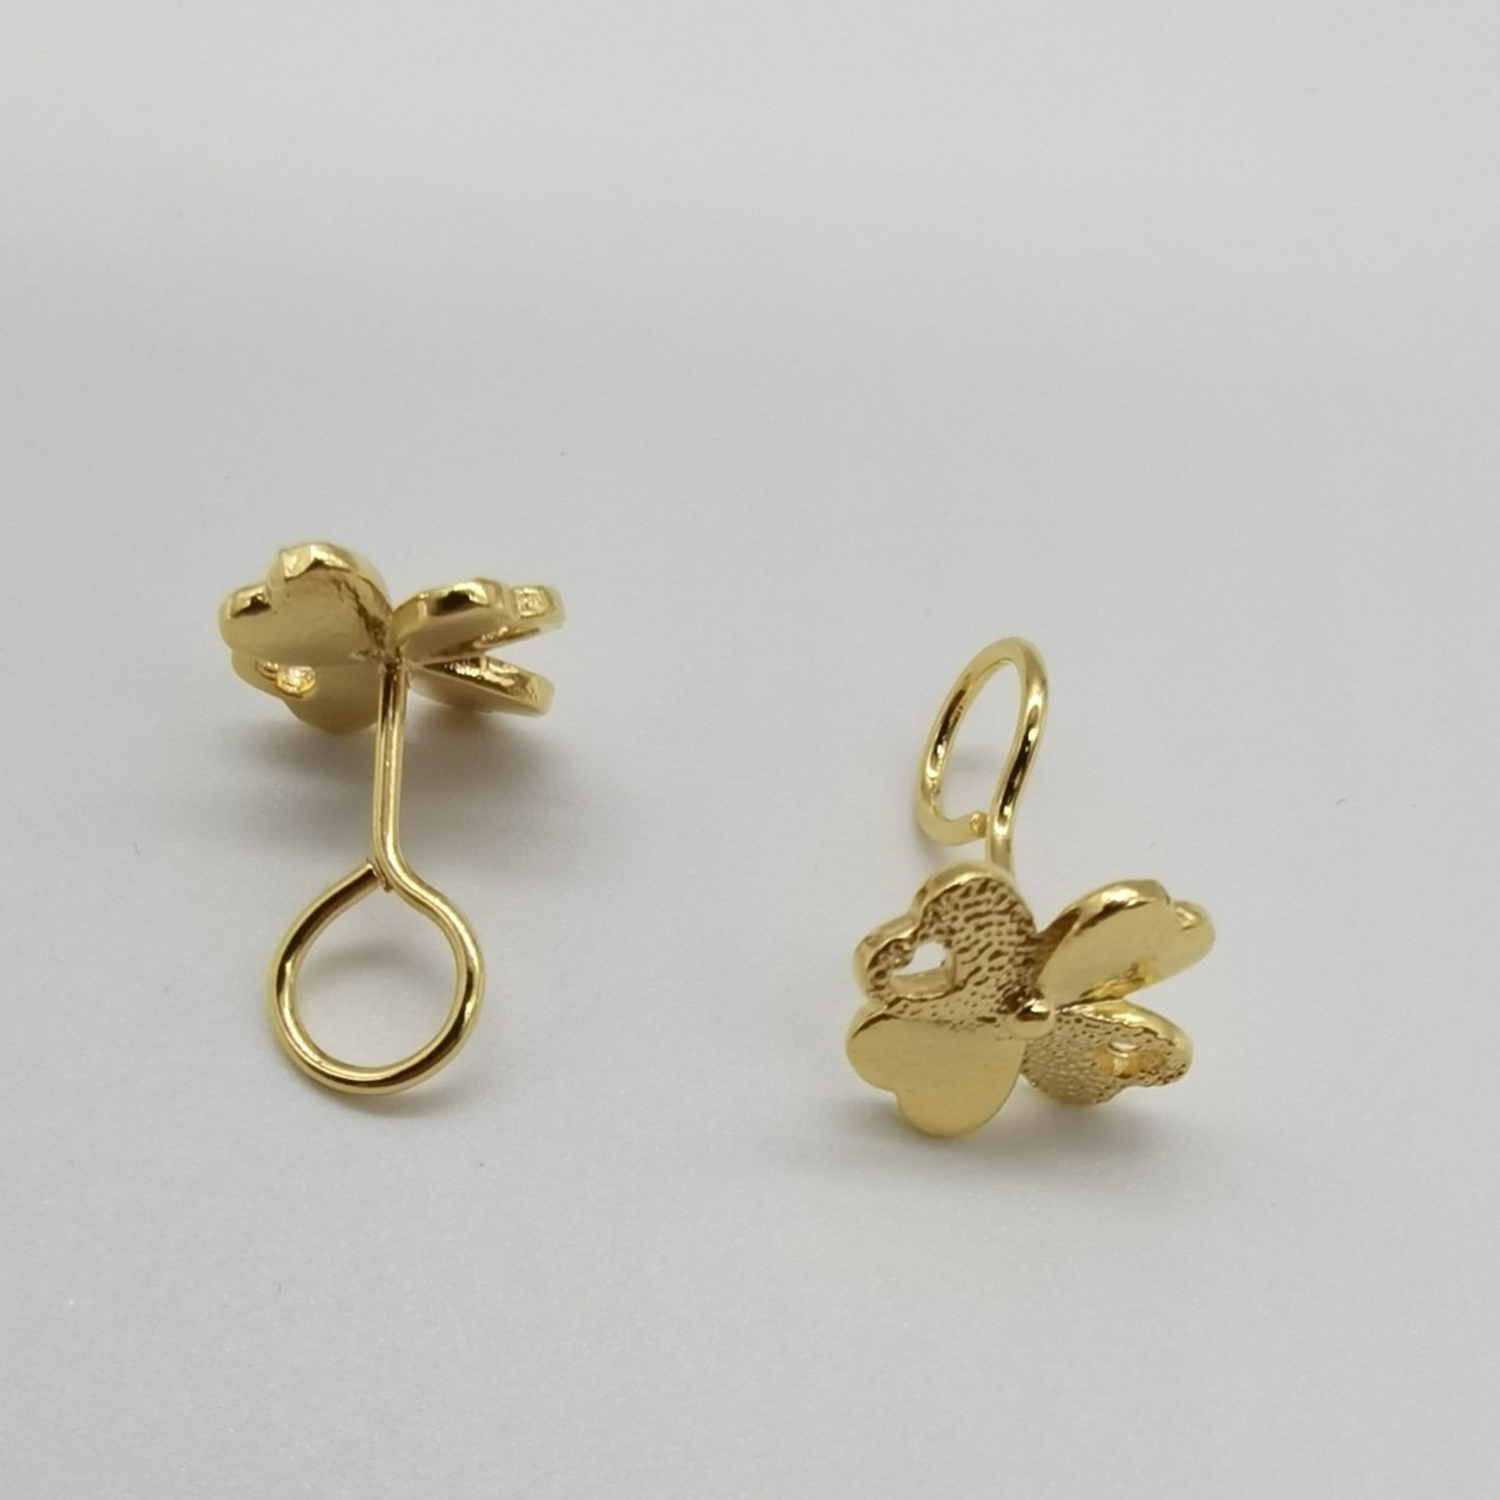 Alluvial gold vacuum electroplating 24K gold heart-shaped clover earrings